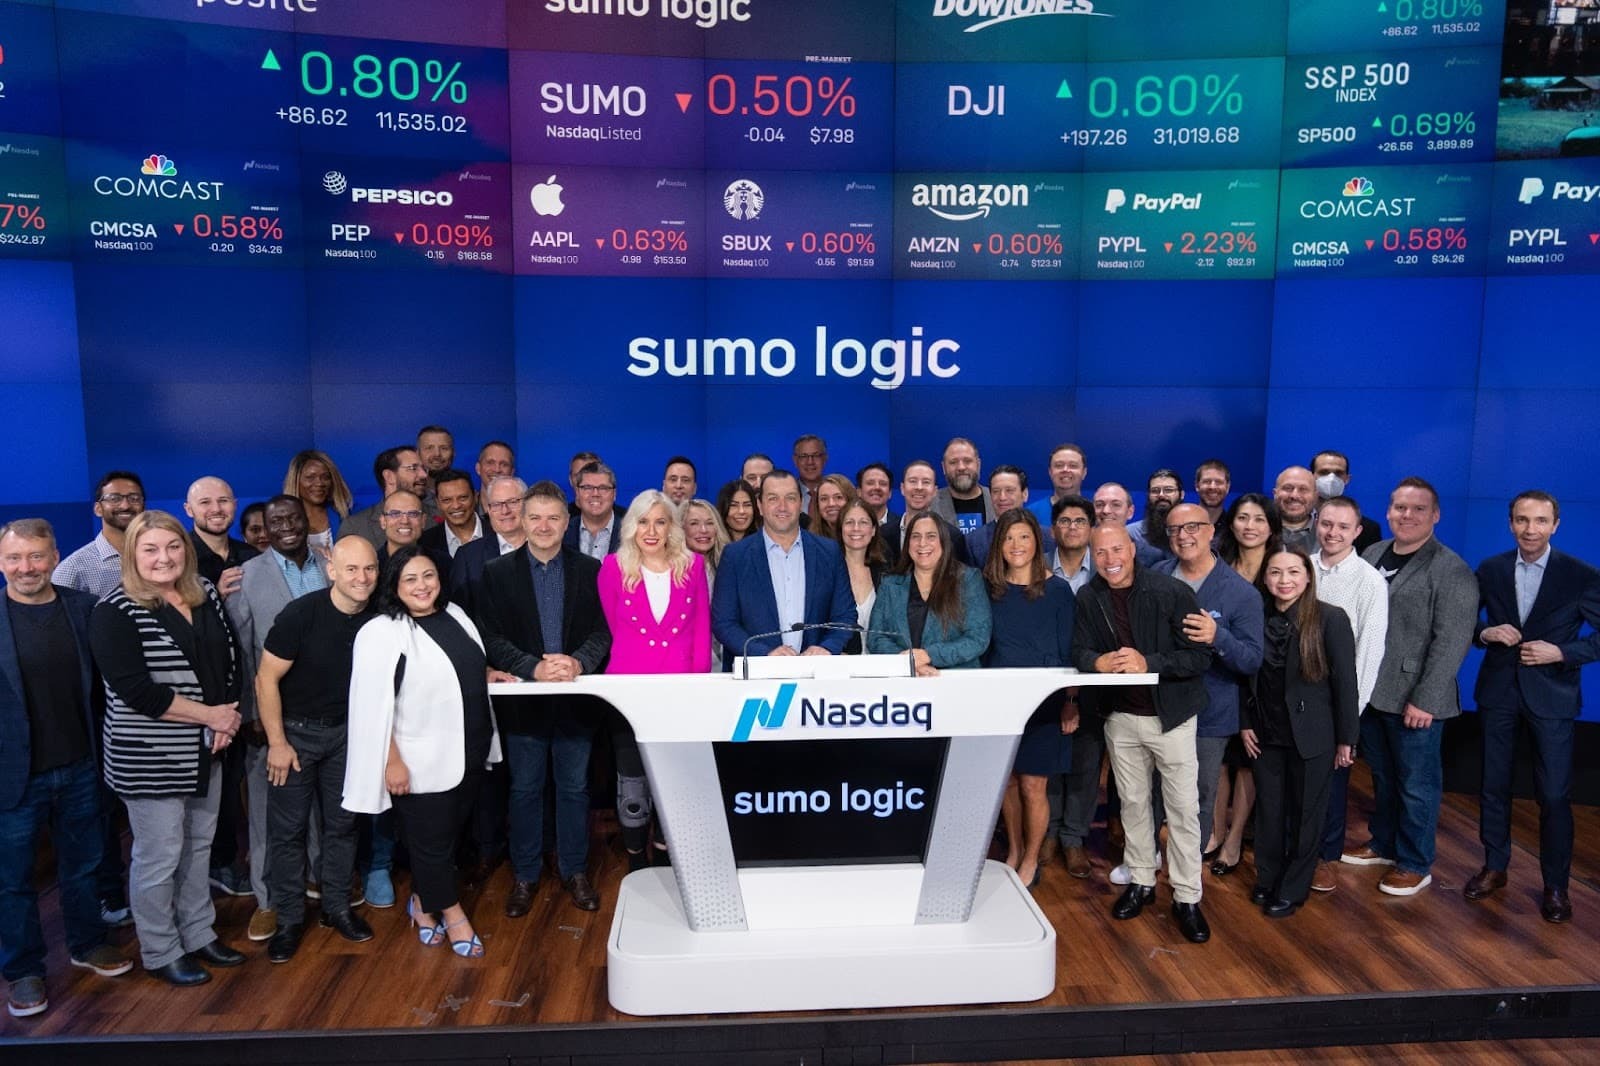 Ringing the bell at Nasdaq on Sumo Logic's 2-year anniversary of going public